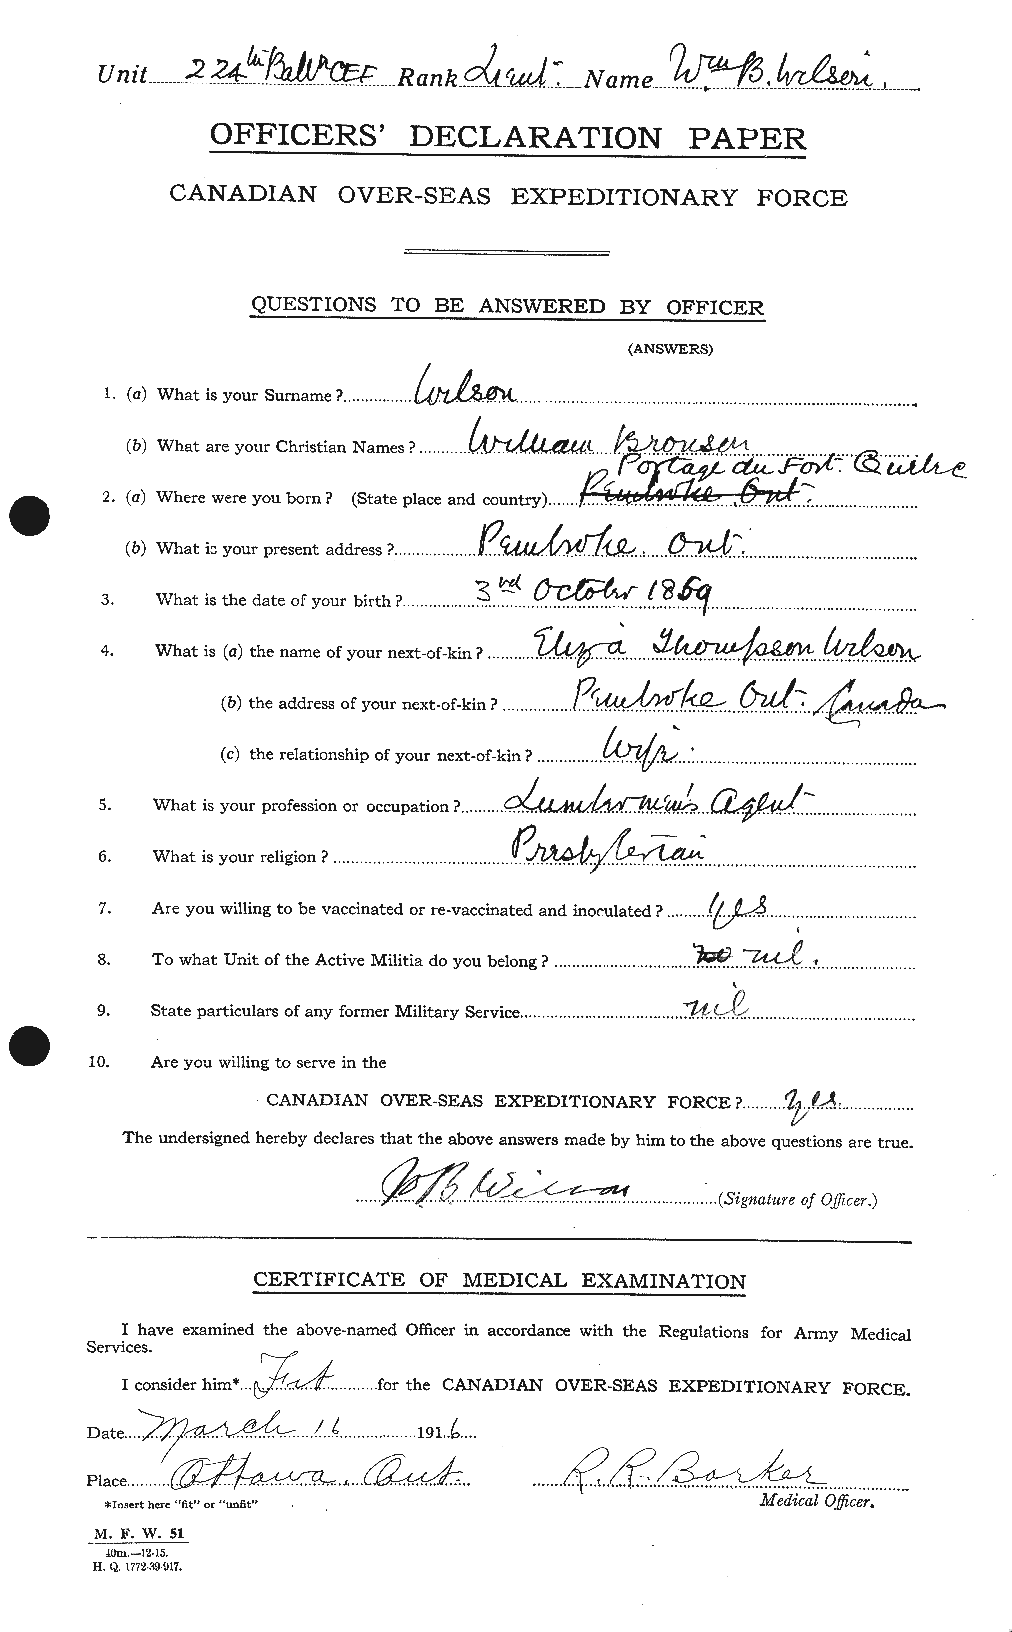 Personnel Records of the First World War - CEF 681944a